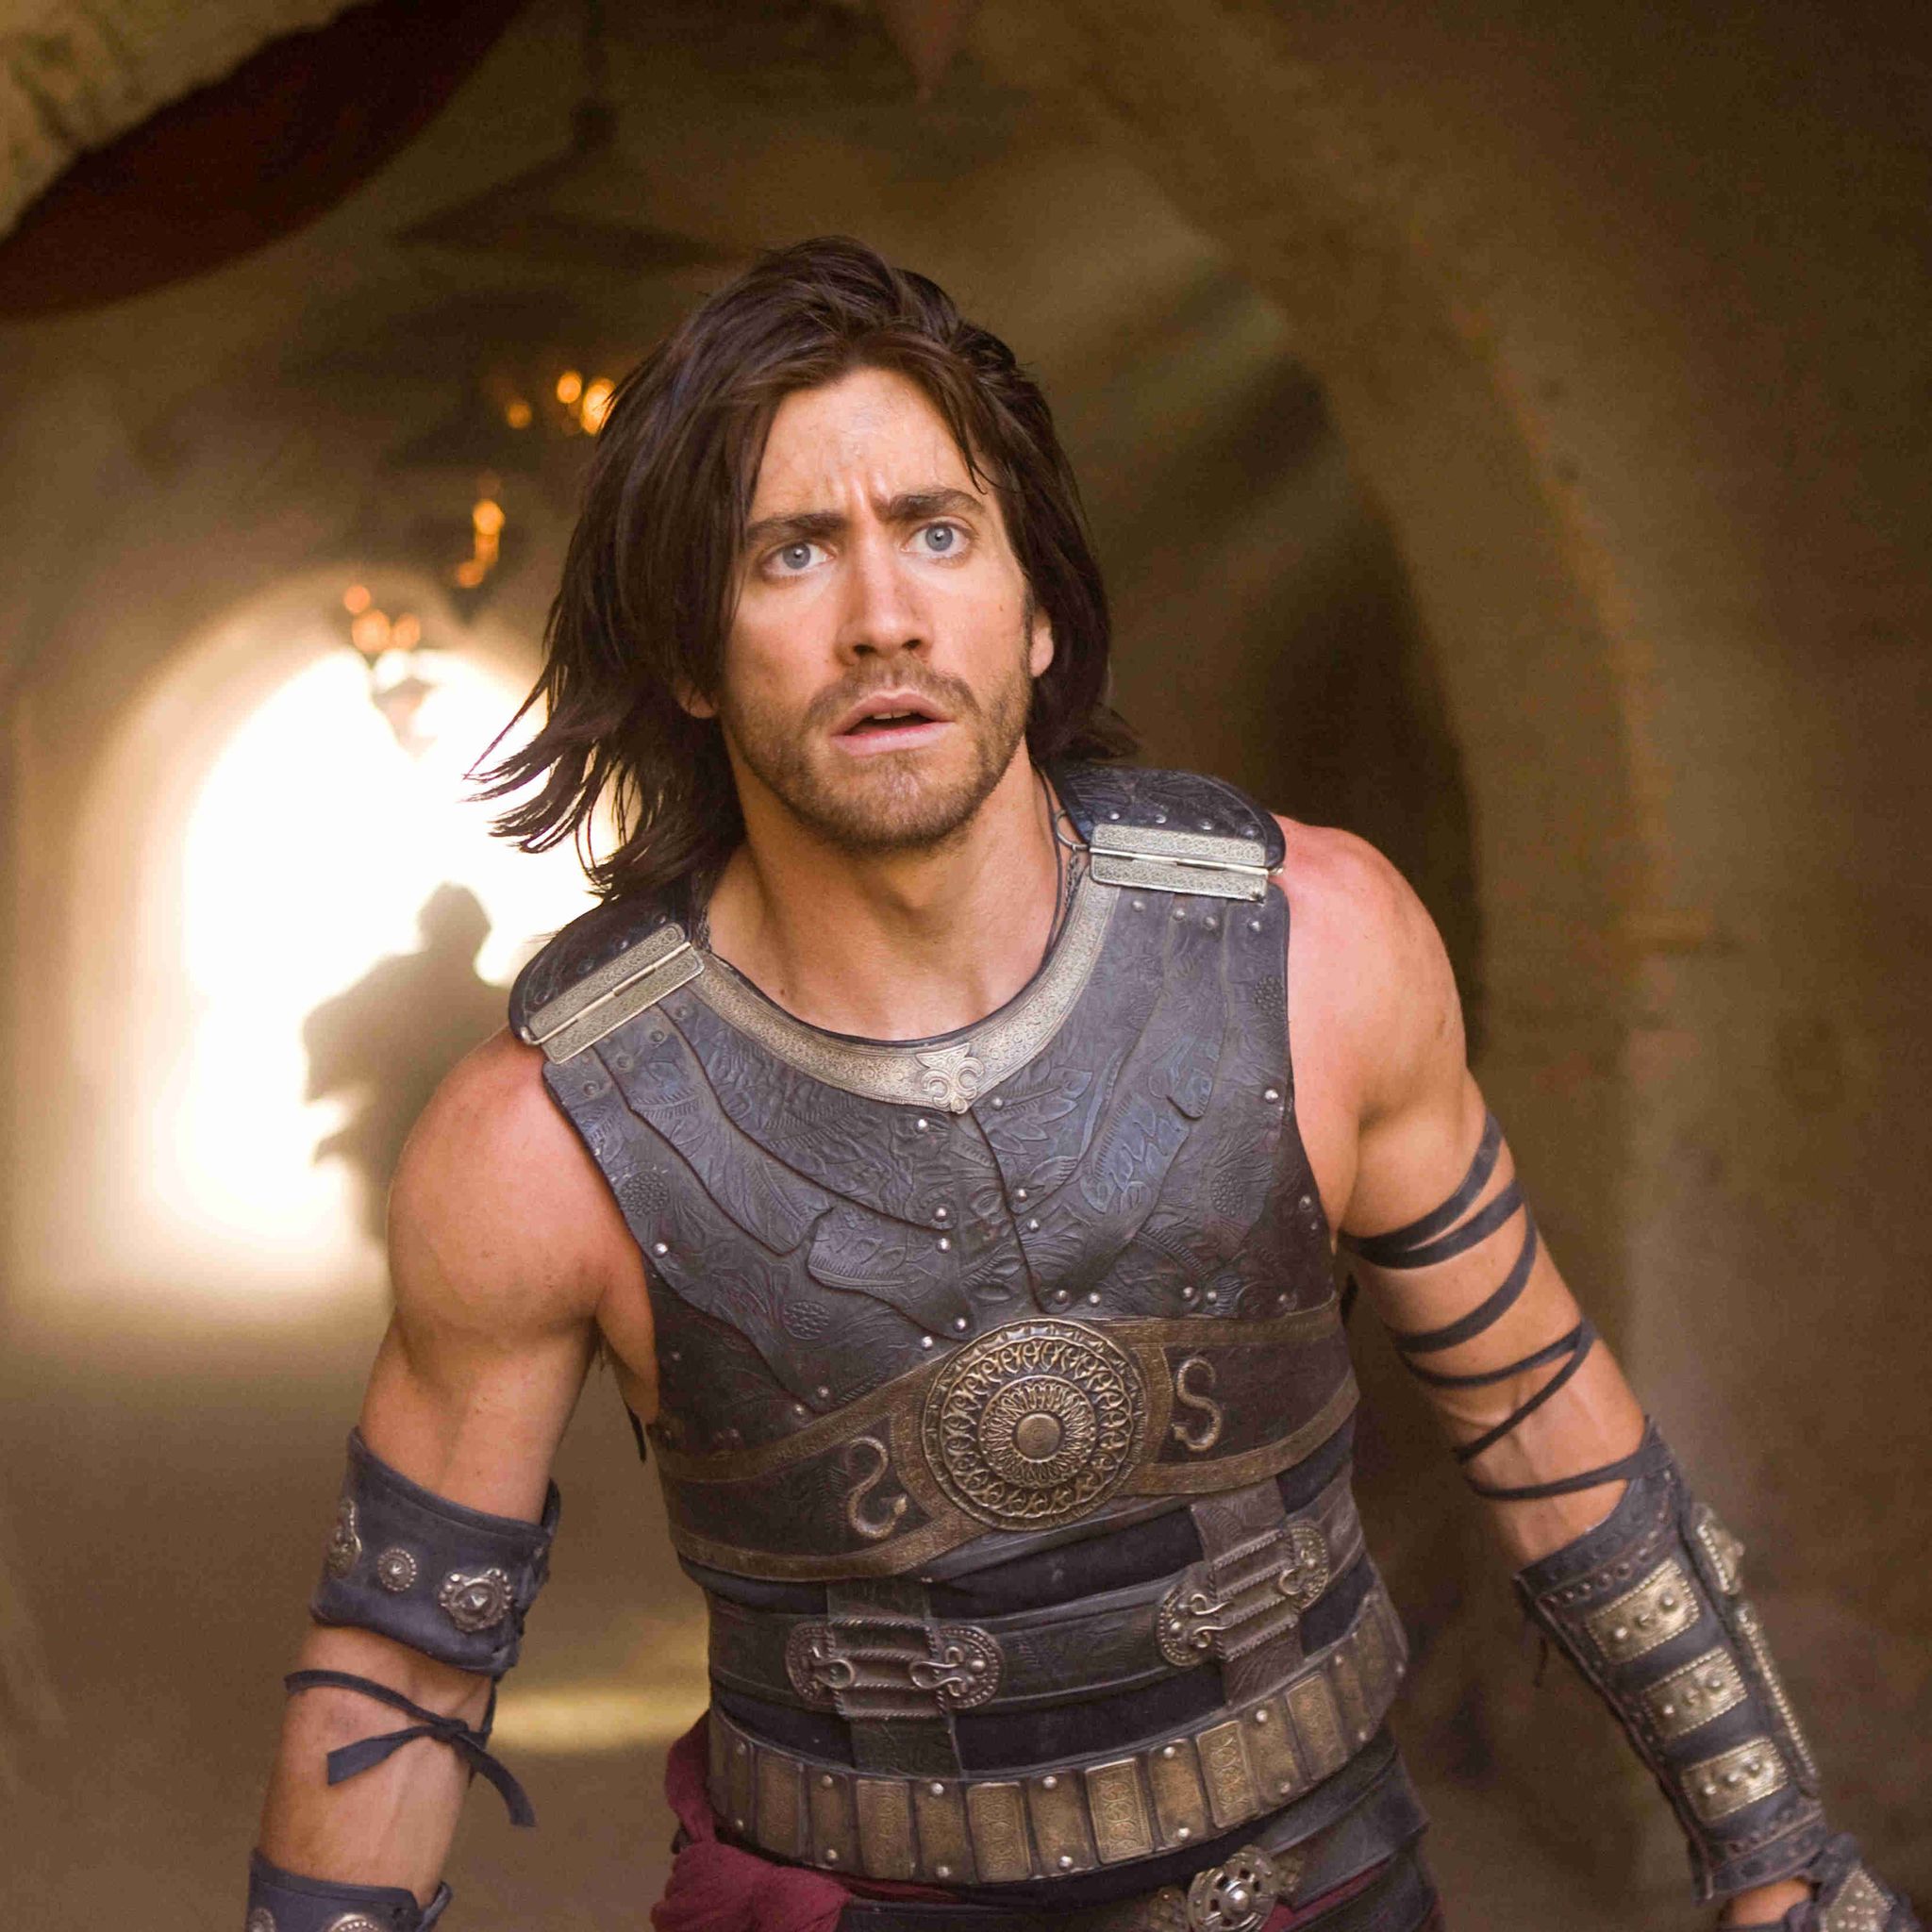 PRINCE OF PERSIA: THE SANDS OF TIME MOVIE TRAILER 